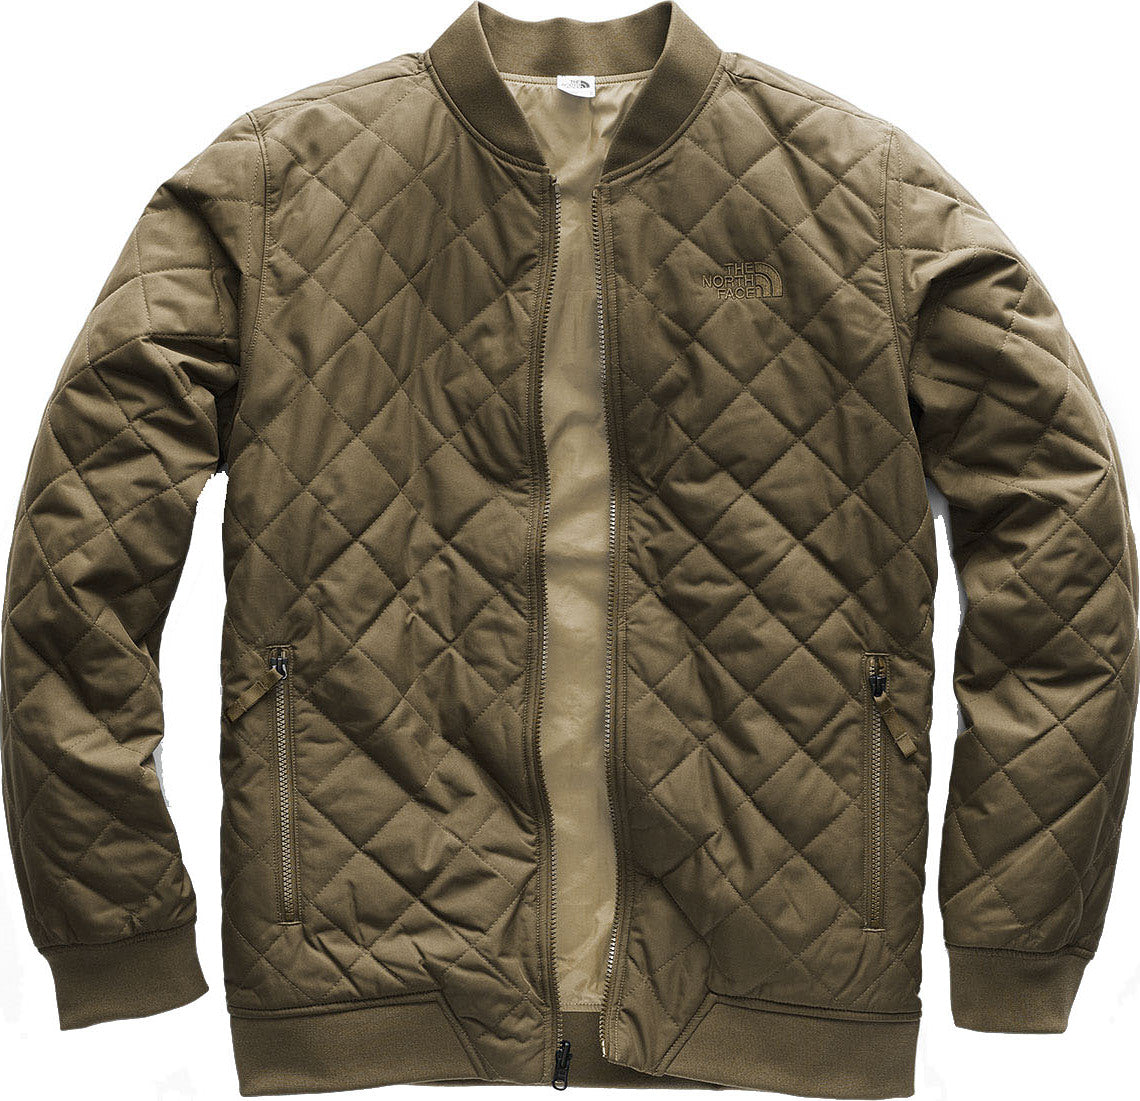 north face jester jacket camo